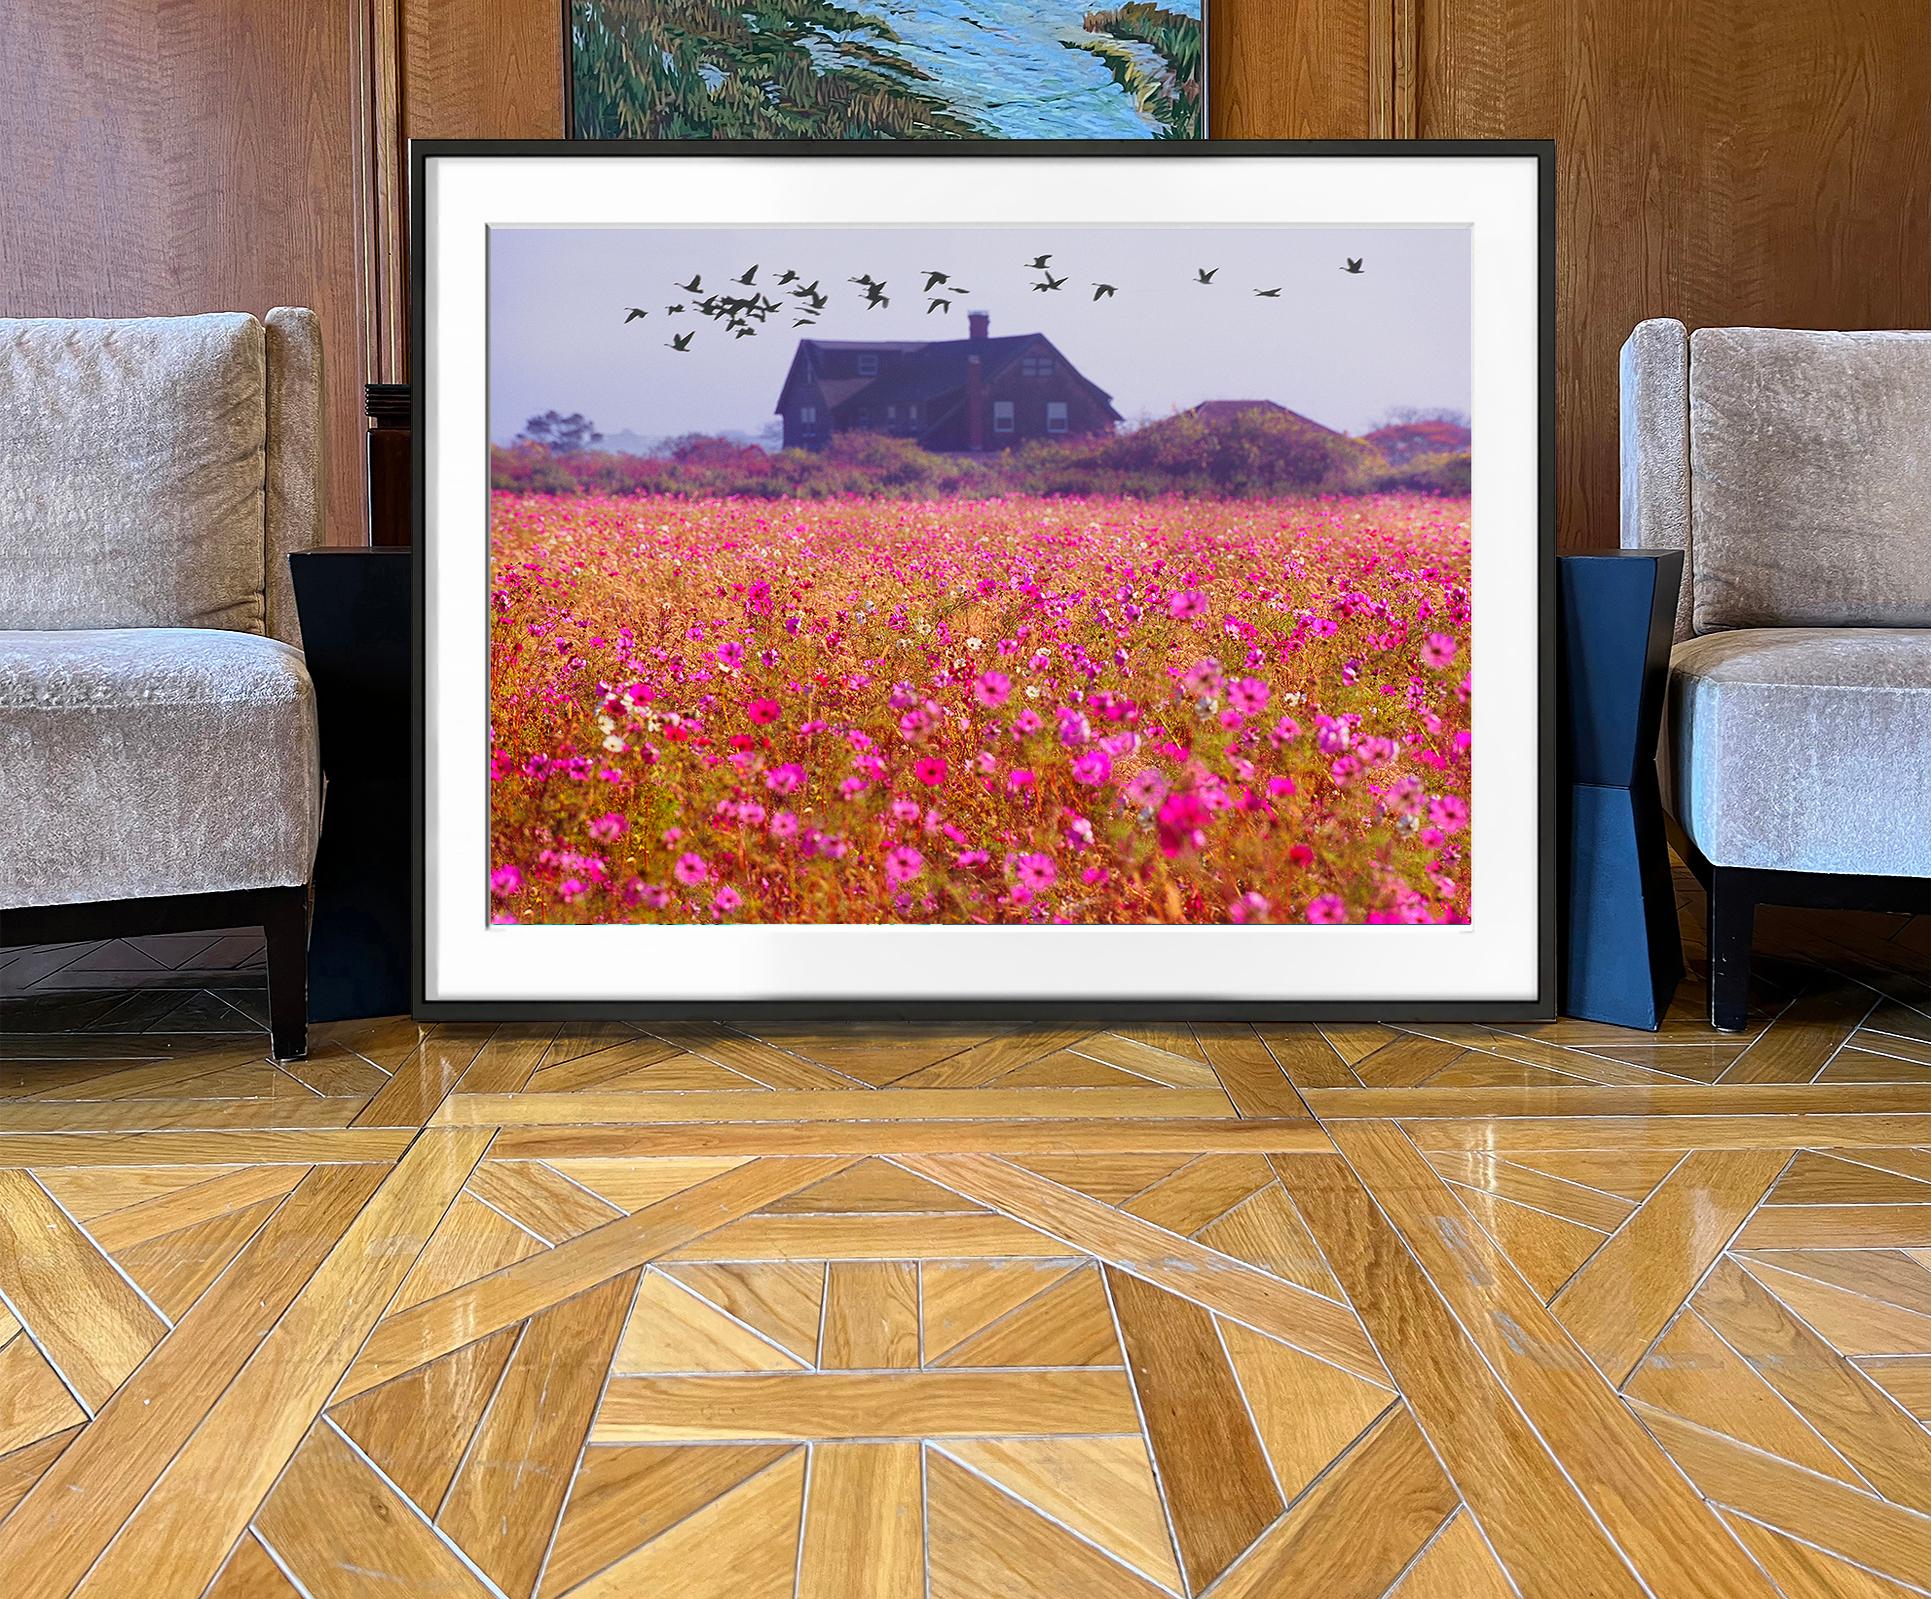 Like a painting by Monet, an expansive field of blooming flowers fill the top two-thirds of the picture plane.  A flock of migrating birds fly over a Shingle-style East Hampton house.
Signed, dated, and numbered lower right  2/4/ unframed, printed